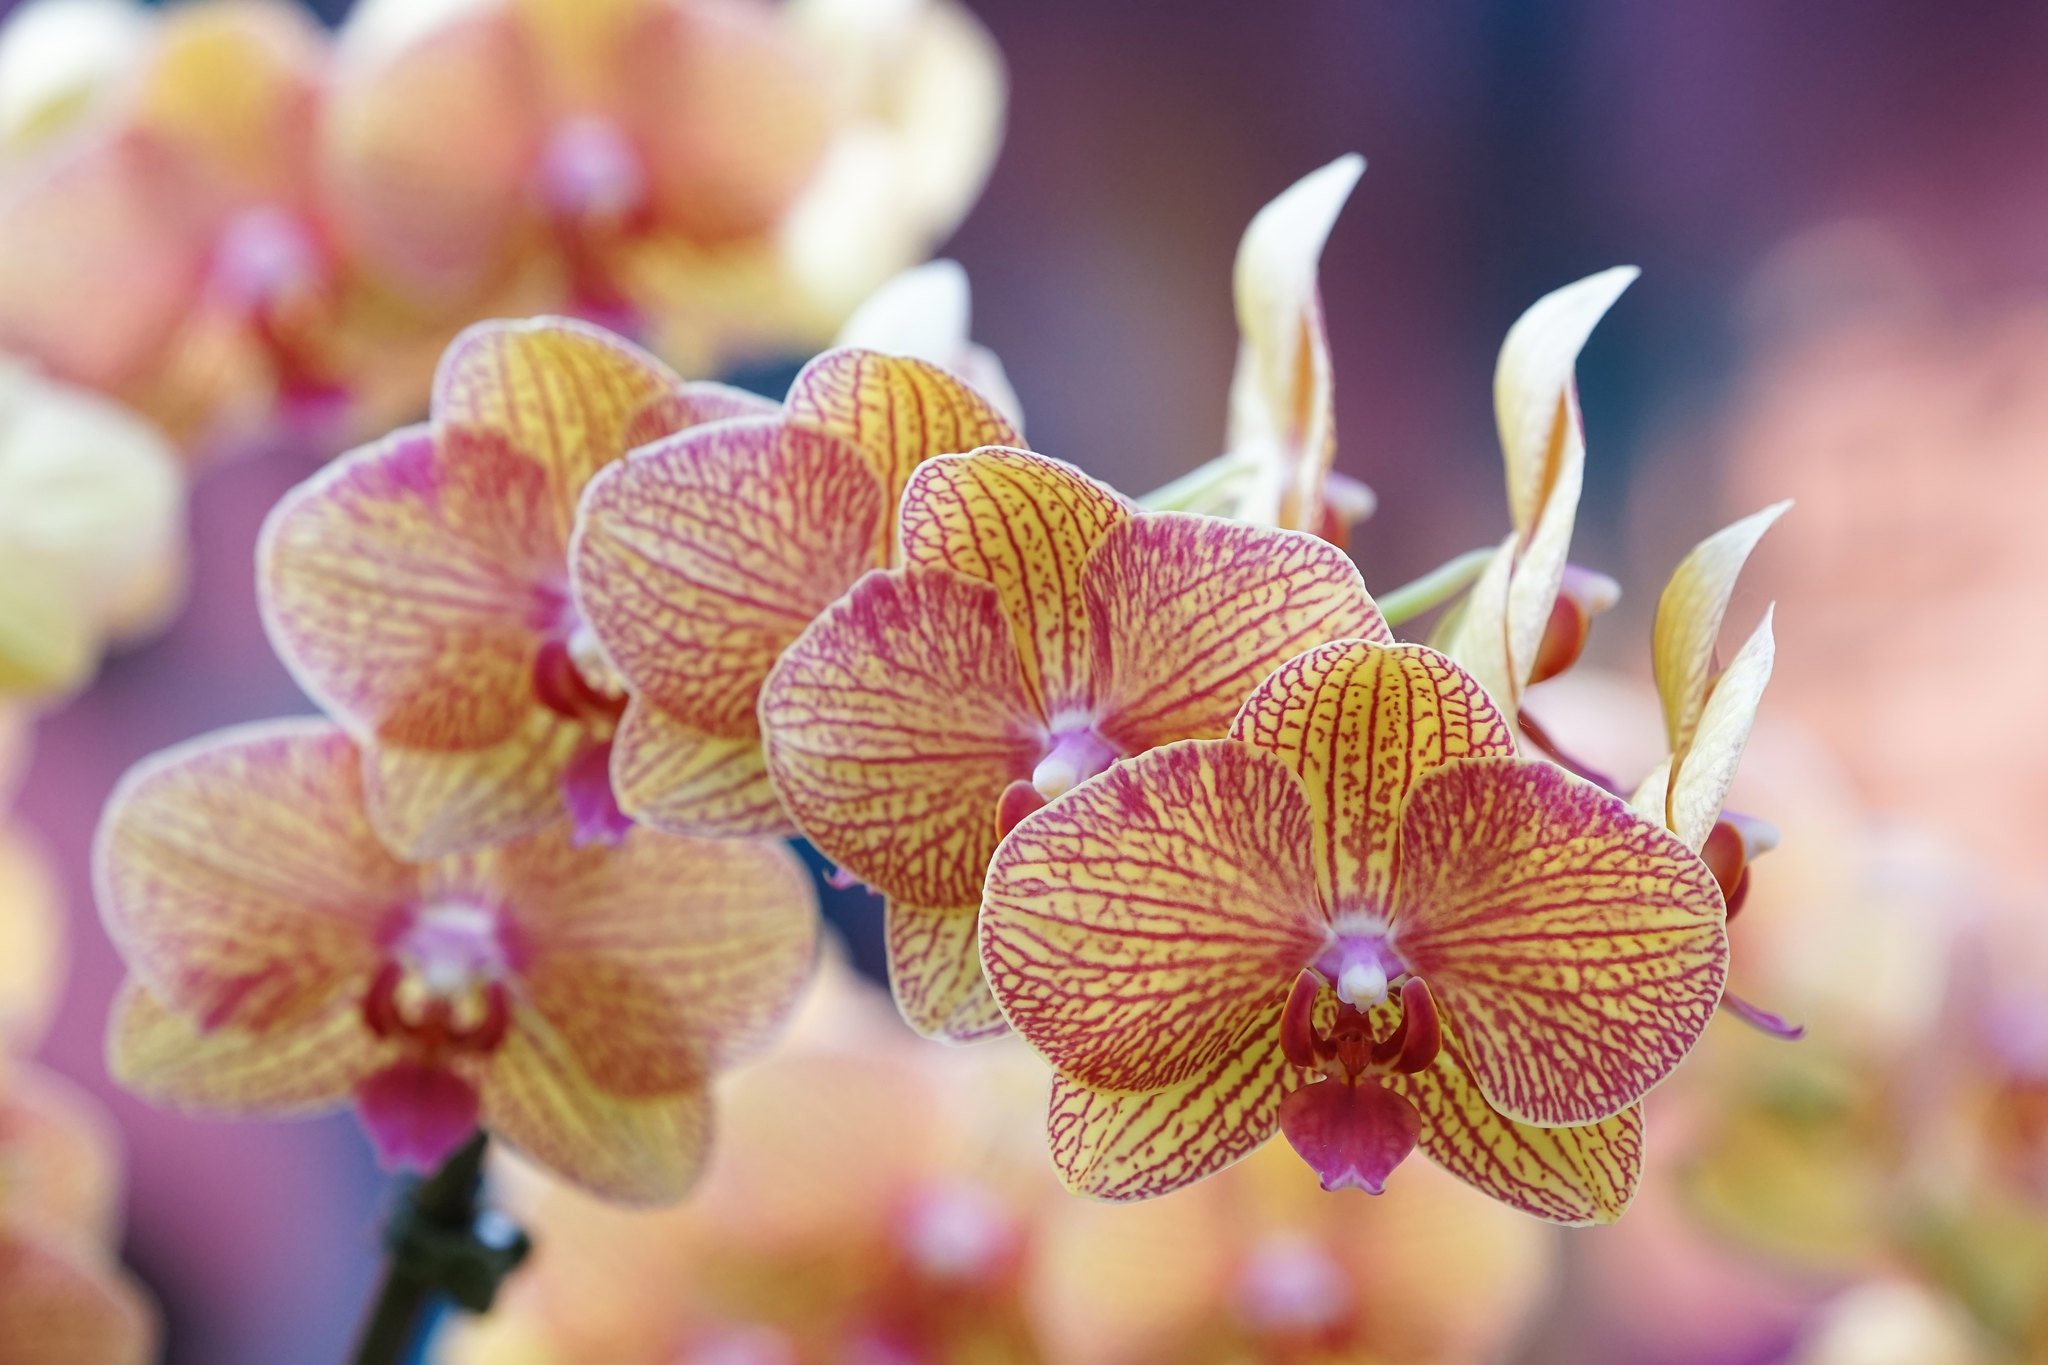 Orchids Flowers Colorful Macro 2048x1365